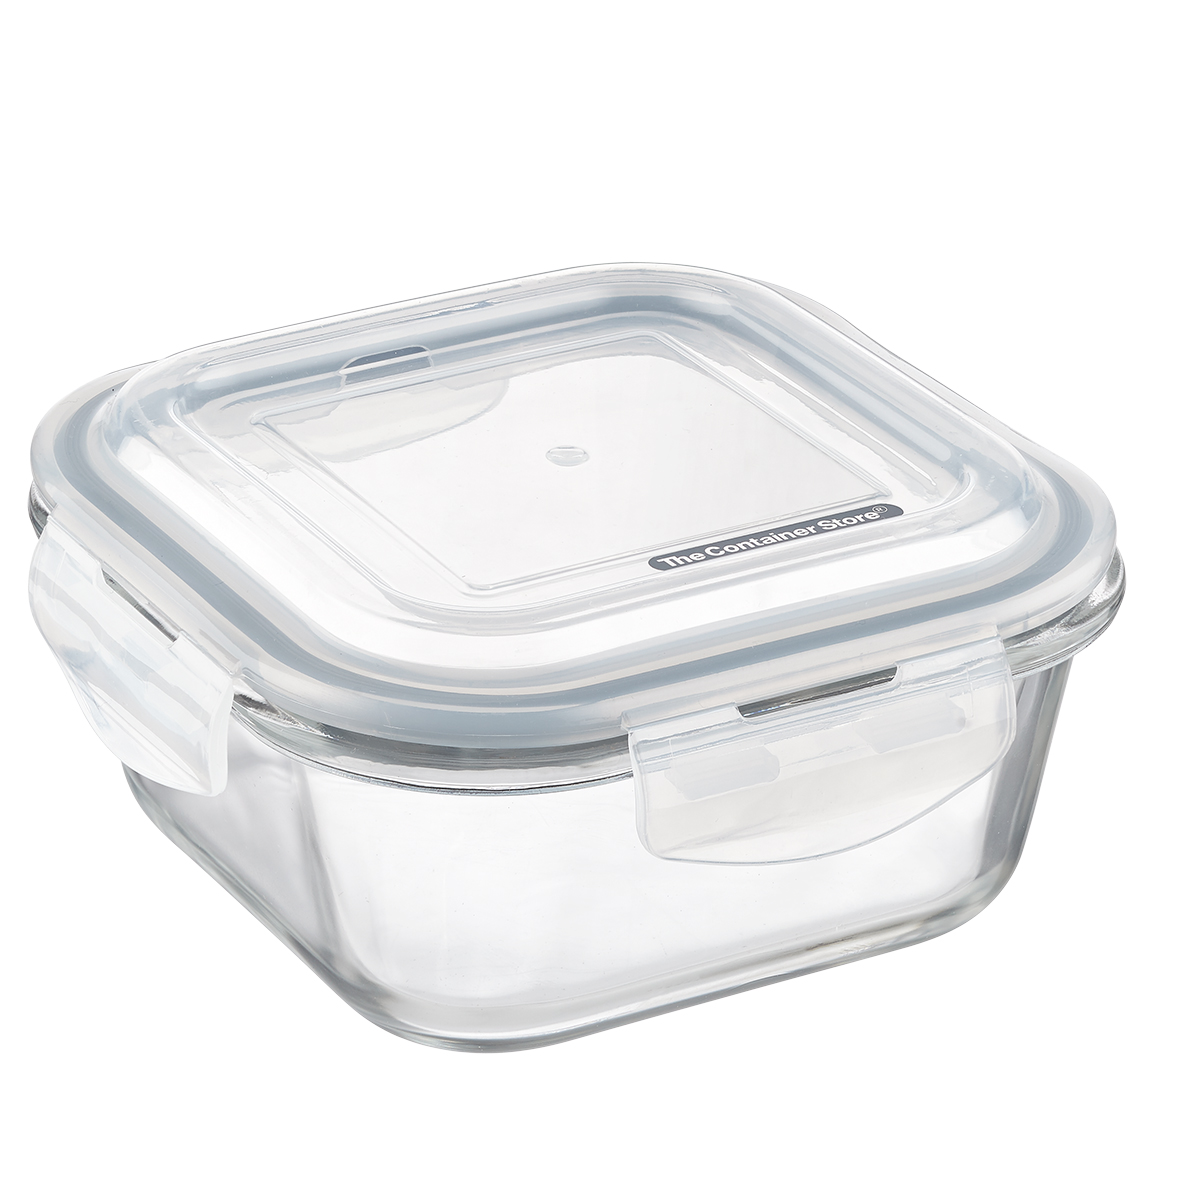 https://www.containerstore.com/catalogimages/383224/10078988-borosilicate-food-storage-s.jpg